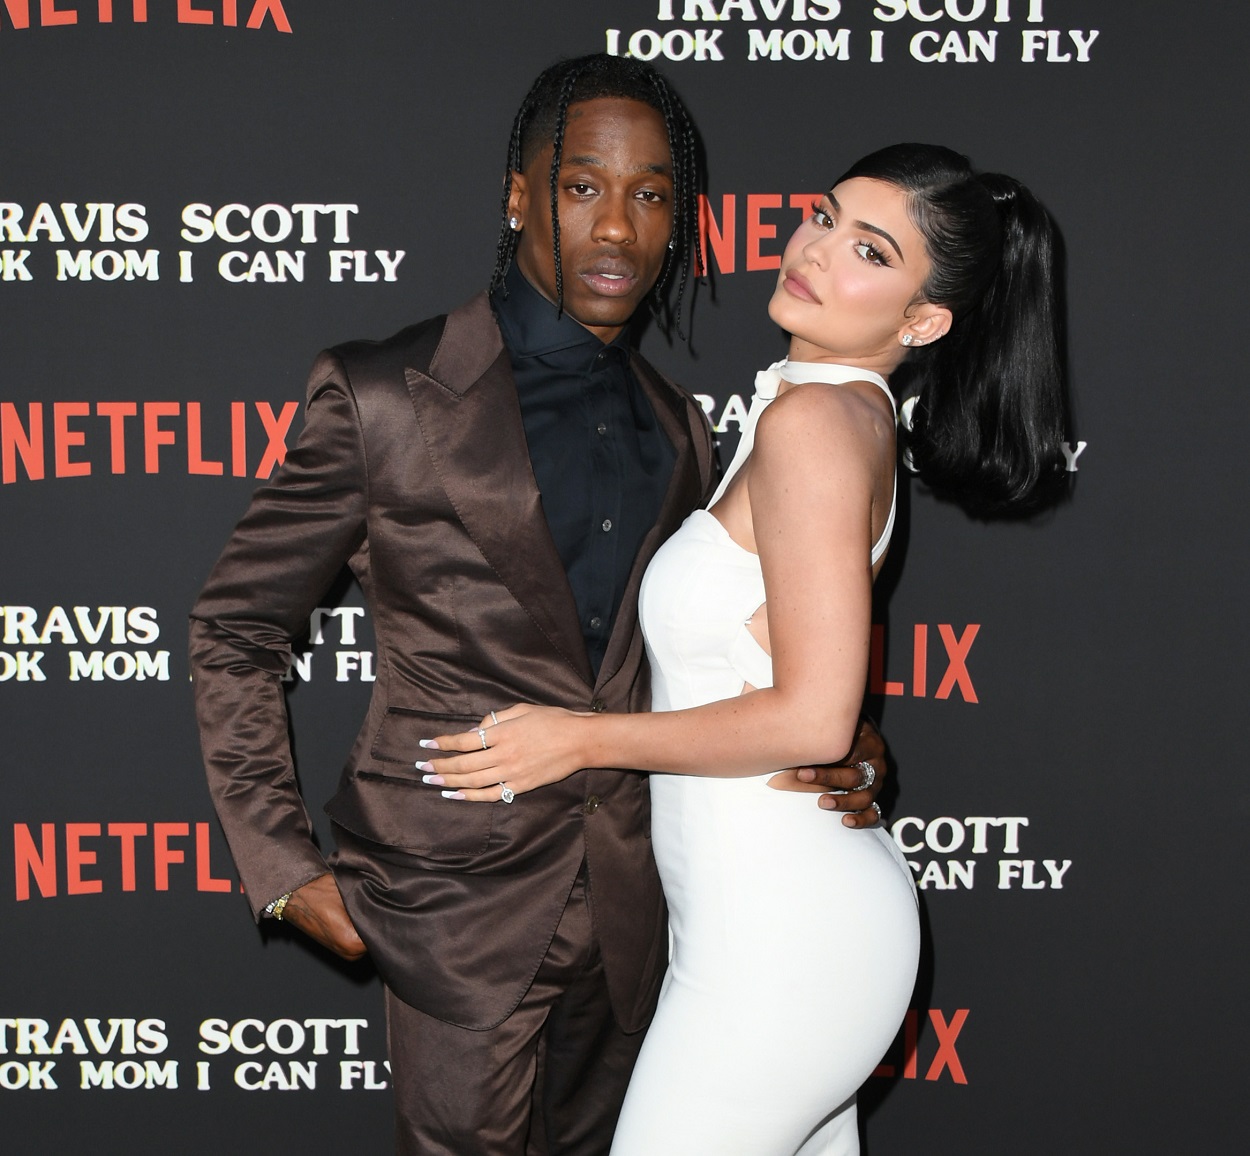 Travis Scott and Kylie Jenner attend the premiere of Look Mom I Can Fly